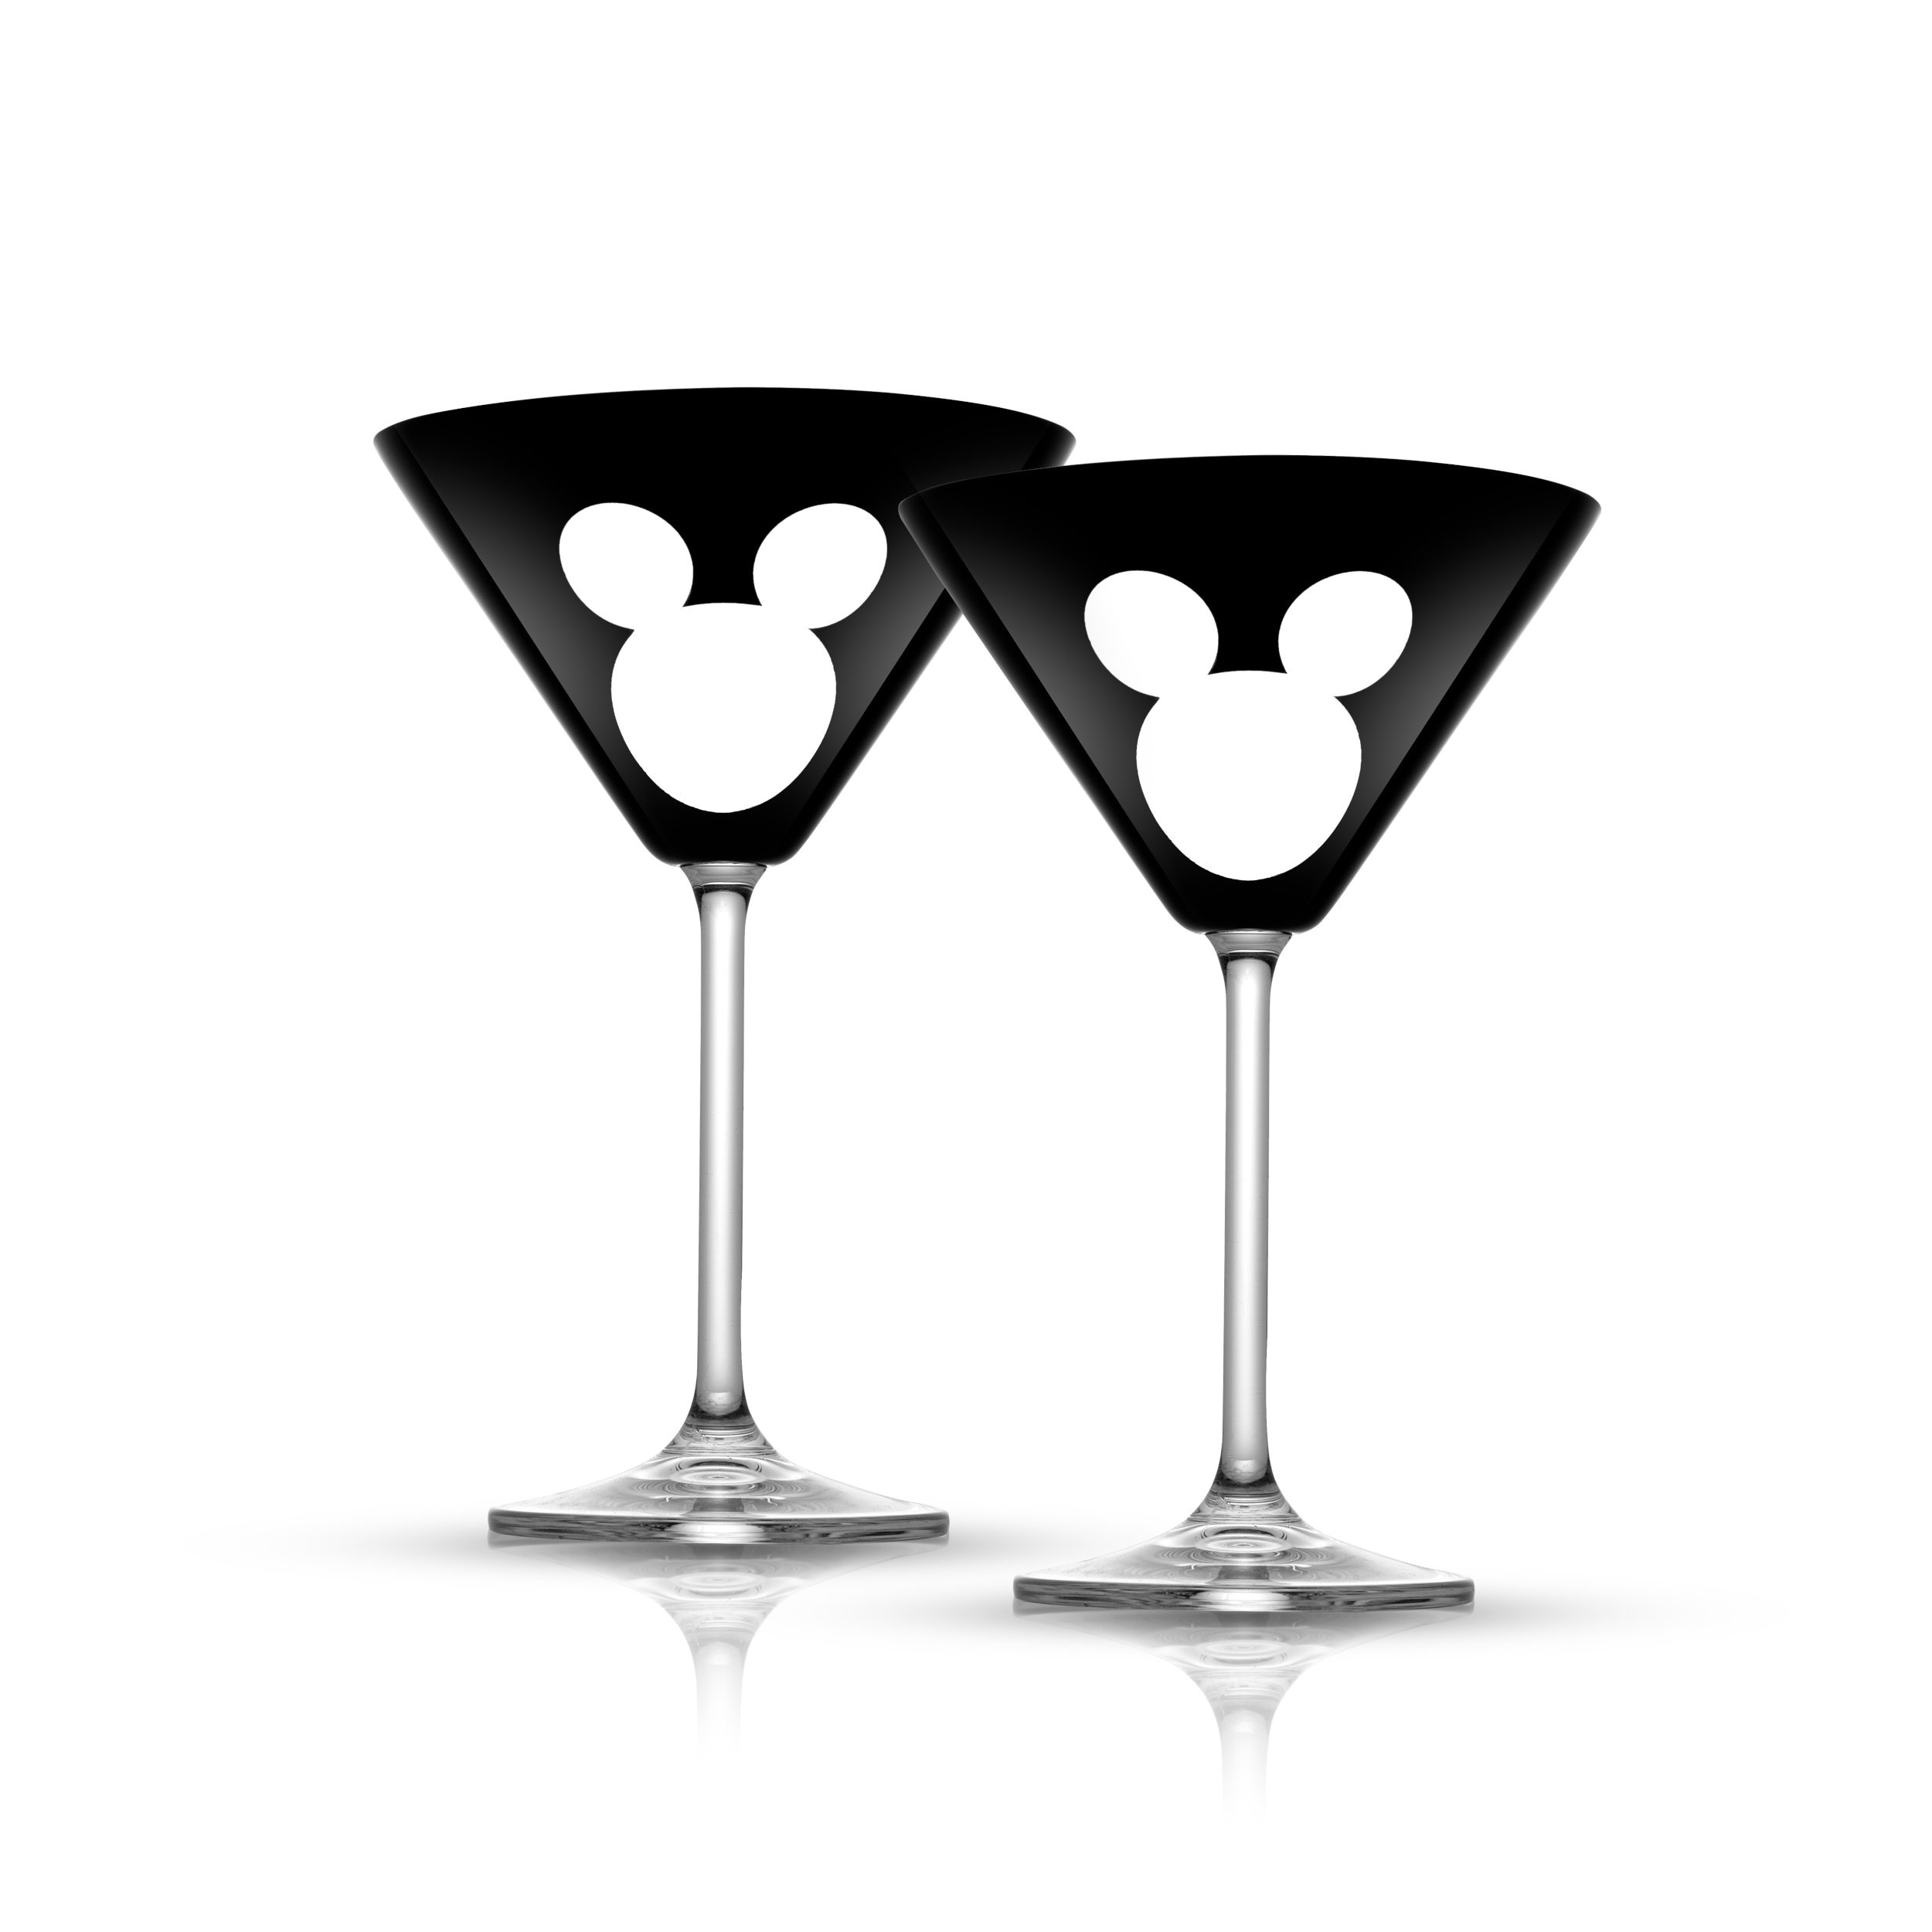 https://ak1.ostkcdn.com/images/products/is/images/direct/5a65863d0d7026794c9243503da204c52f17eebe/Disney-Luxury-Mickey-Mouse-Crystal-Martini-Glass---10-oz---Set-of-2.jpg